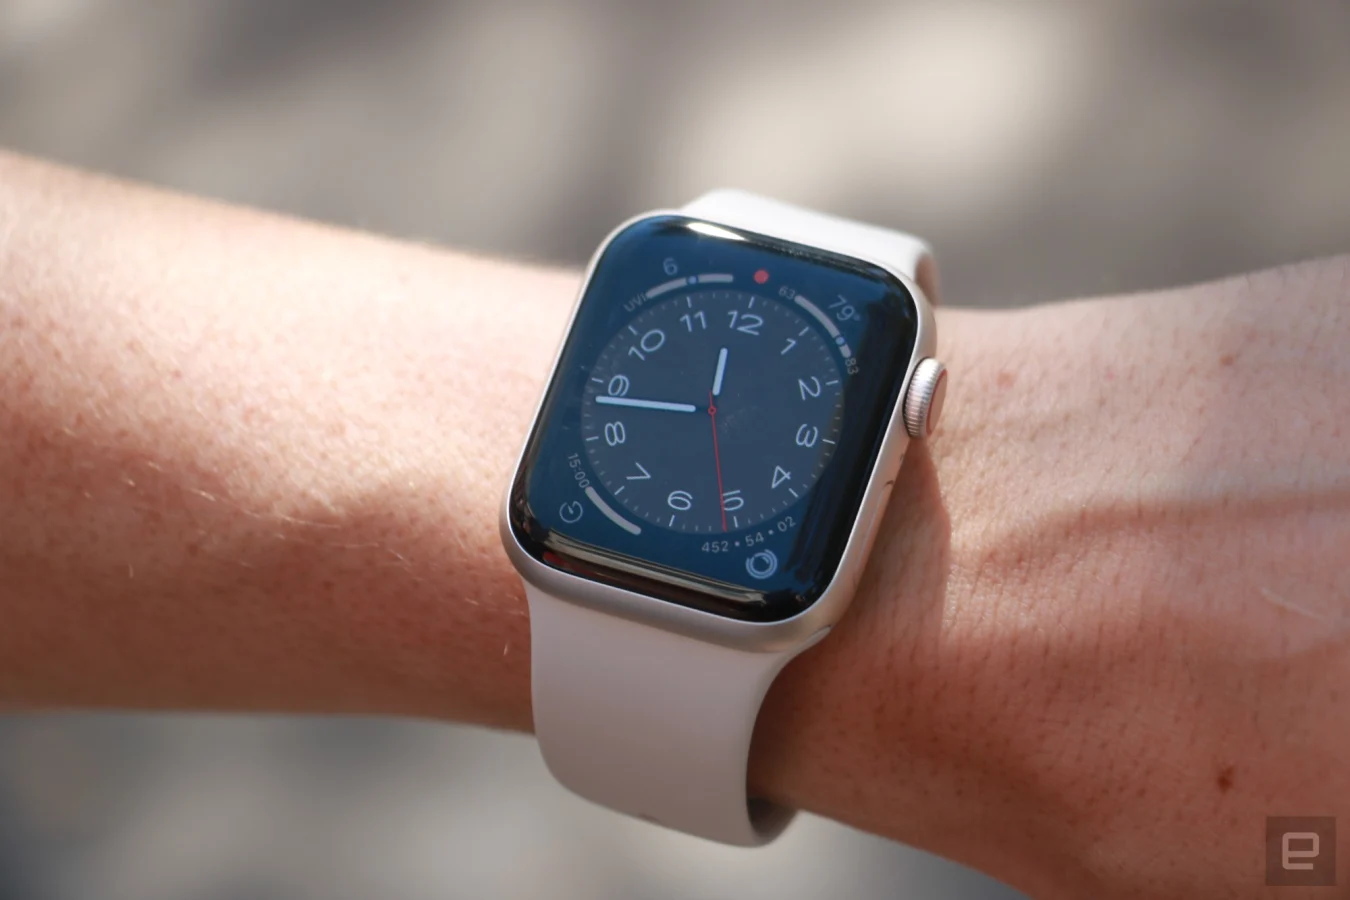 Apple Watch SE (2022) with a Starlight case and Starlight band, on a person's wrist.